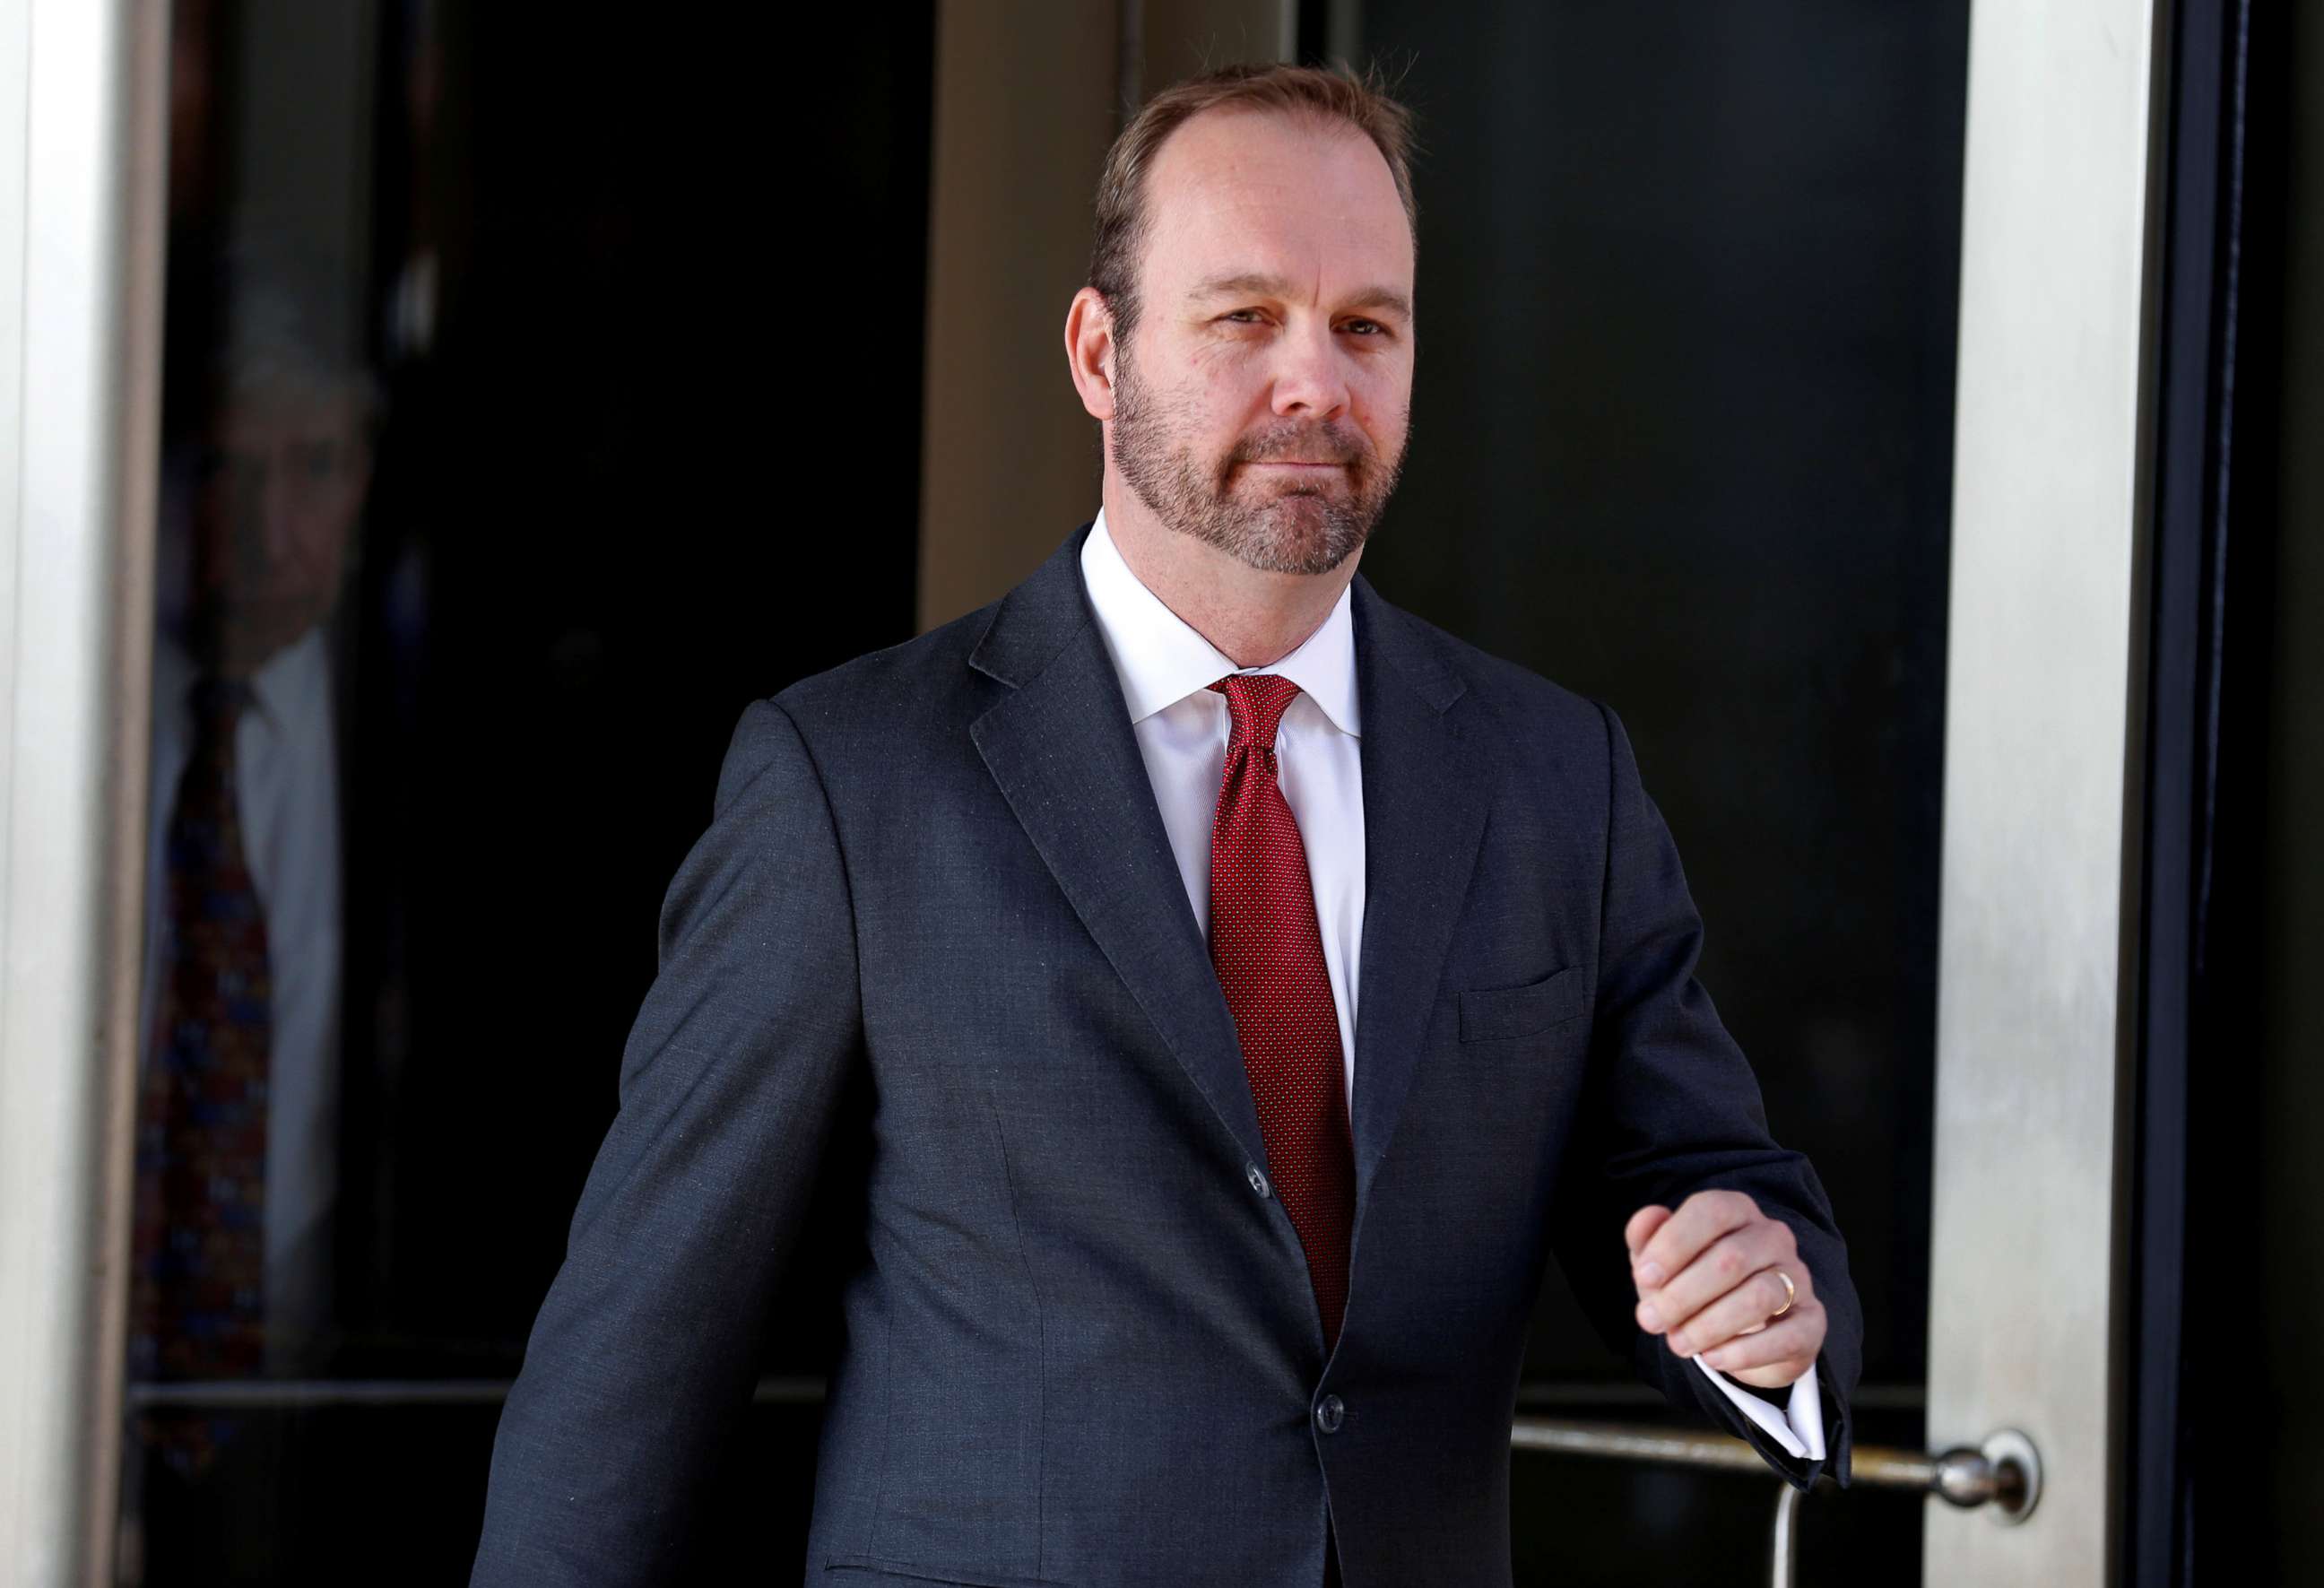 PHOTO: Rick Gates, former campaign aide to President Donald Trump, departs after a bond hearing at U.S. District Court in Washington, D.C., Dec. 11, 2017.